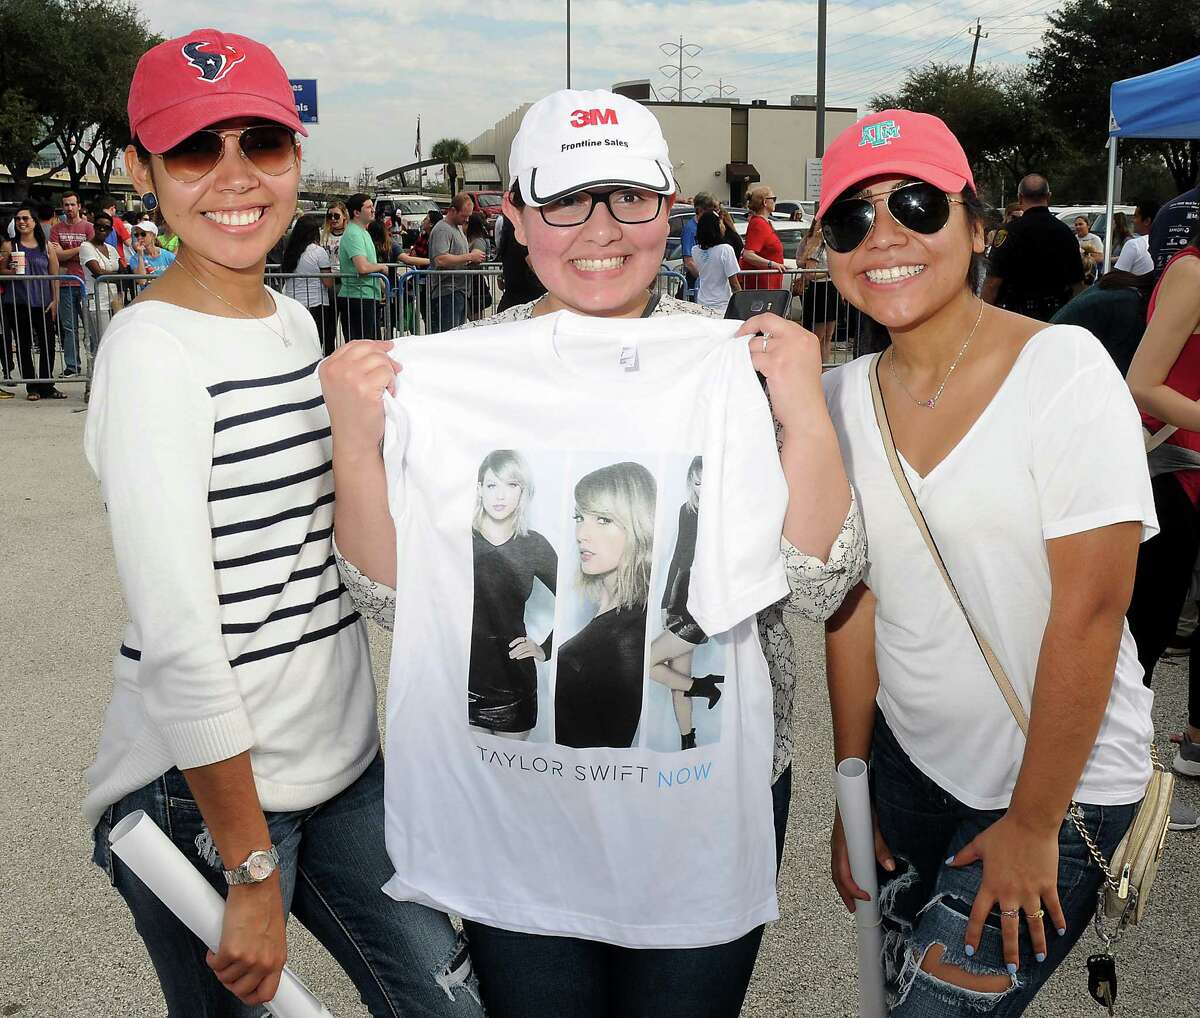 Fans gather at the AT&T store on the Southwest Freeway in hopes of winning tickets to see Taylor Swift at her upcoming concert Saturday Jan. 21, 2017.(Dave Rossman photo)